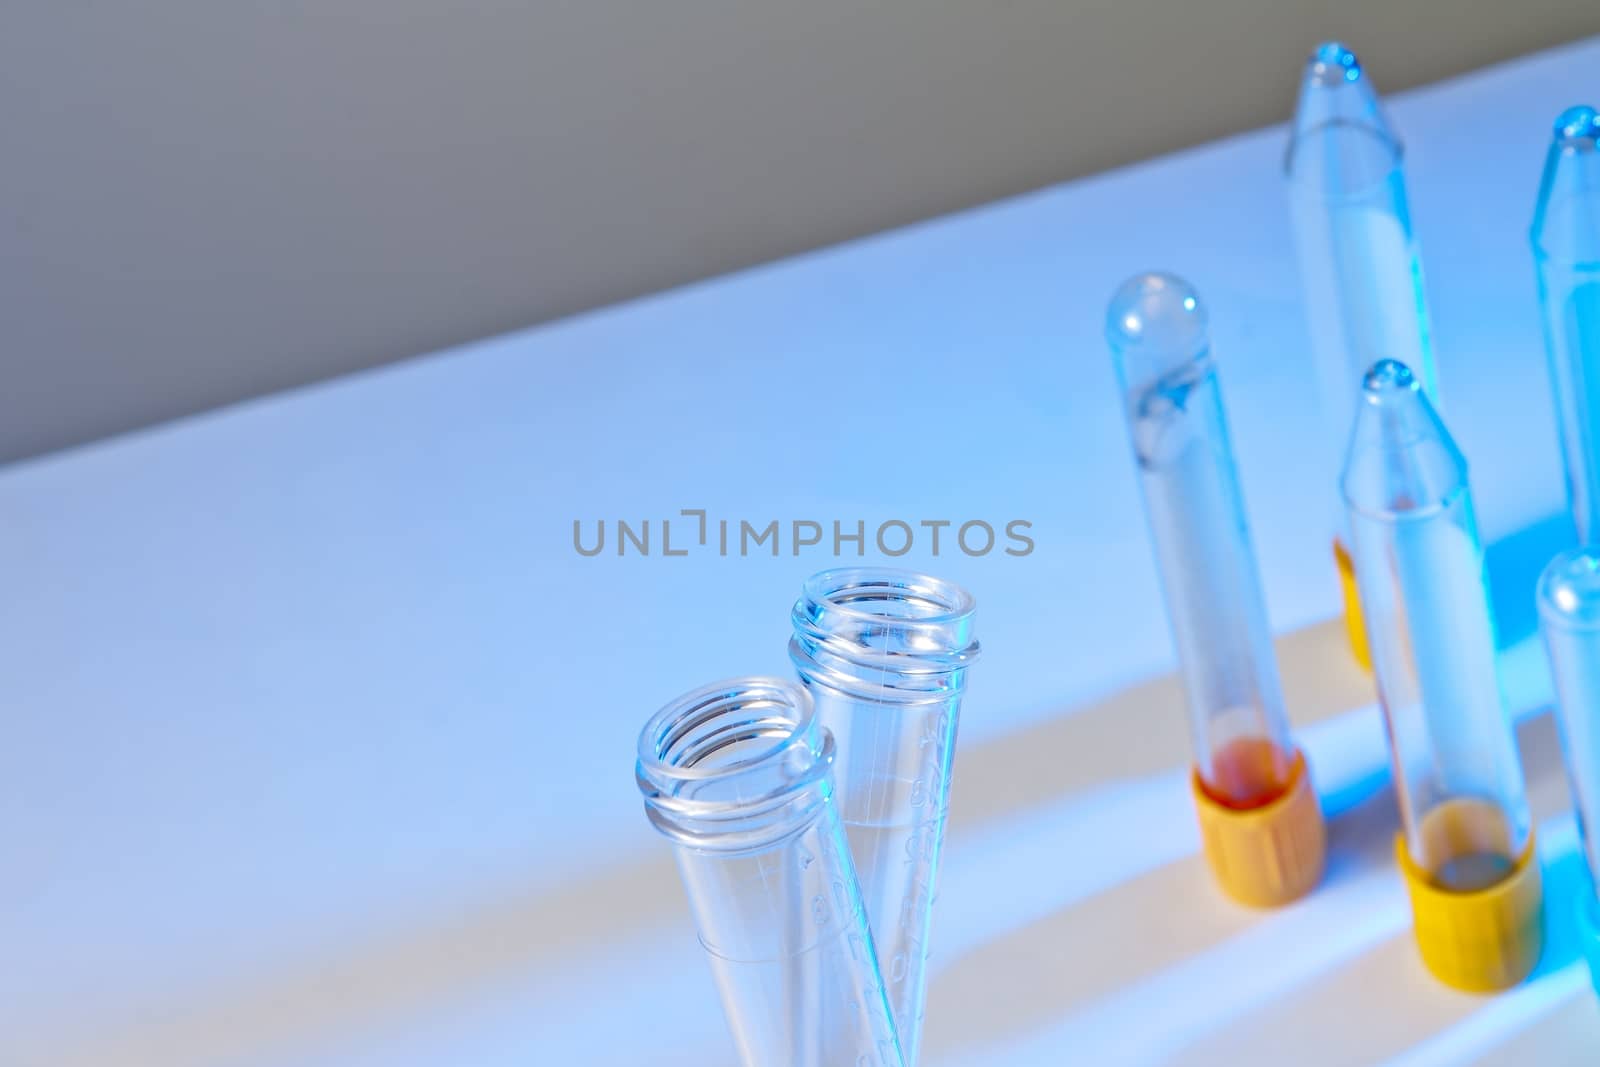 detail of the test tubes in front of test tubes on table in laboratory on blue background